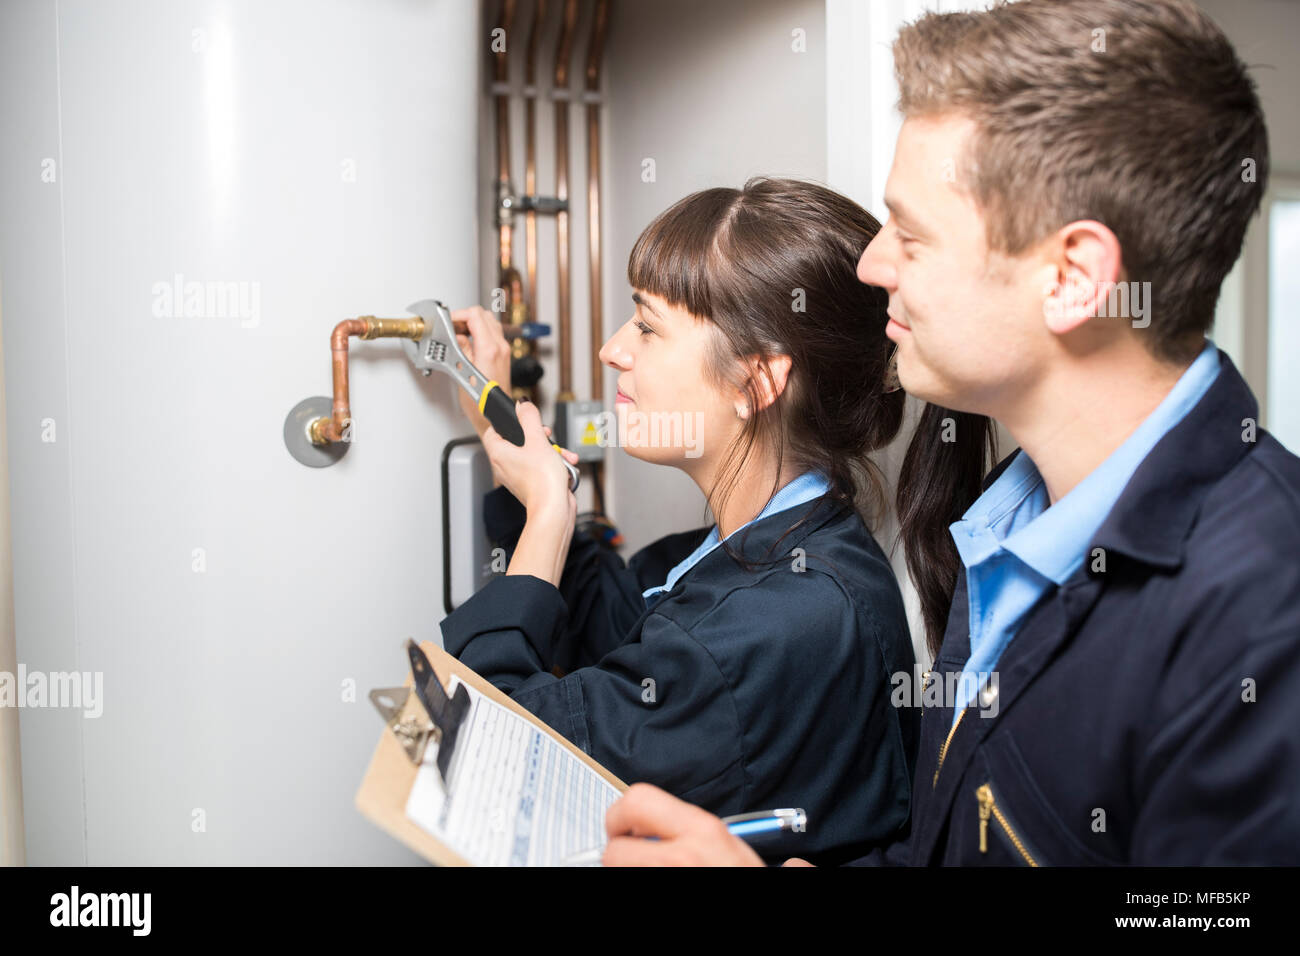 Female Trainee Plumber Working On Central Heating Boiler With Male Engineer Stock Photo